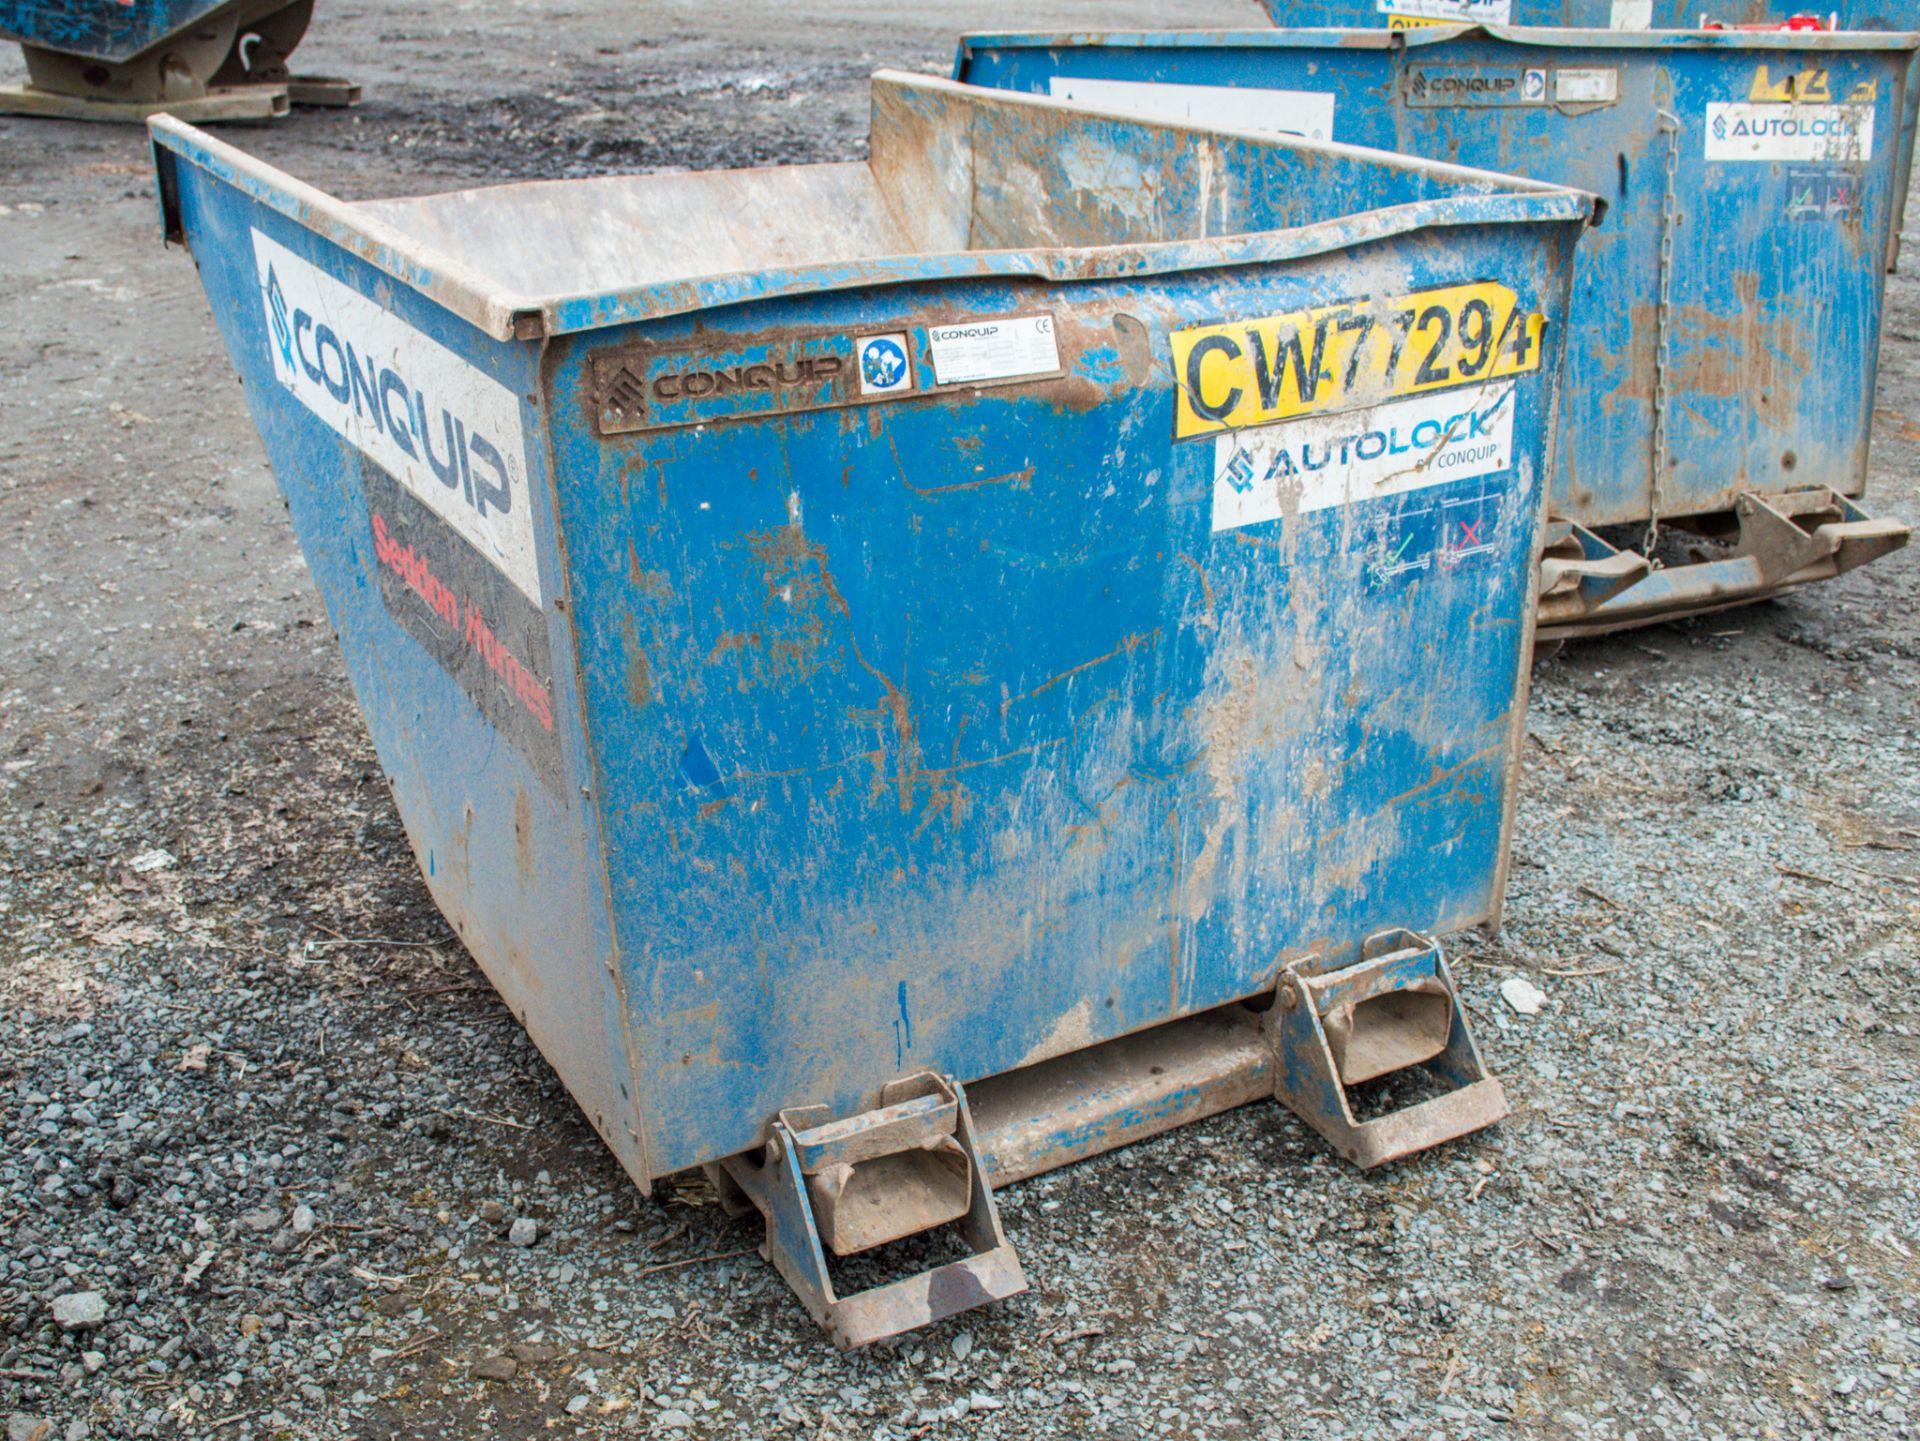 Conquip autolock fork lift tipping skip CW77294 - Image 2 of 2